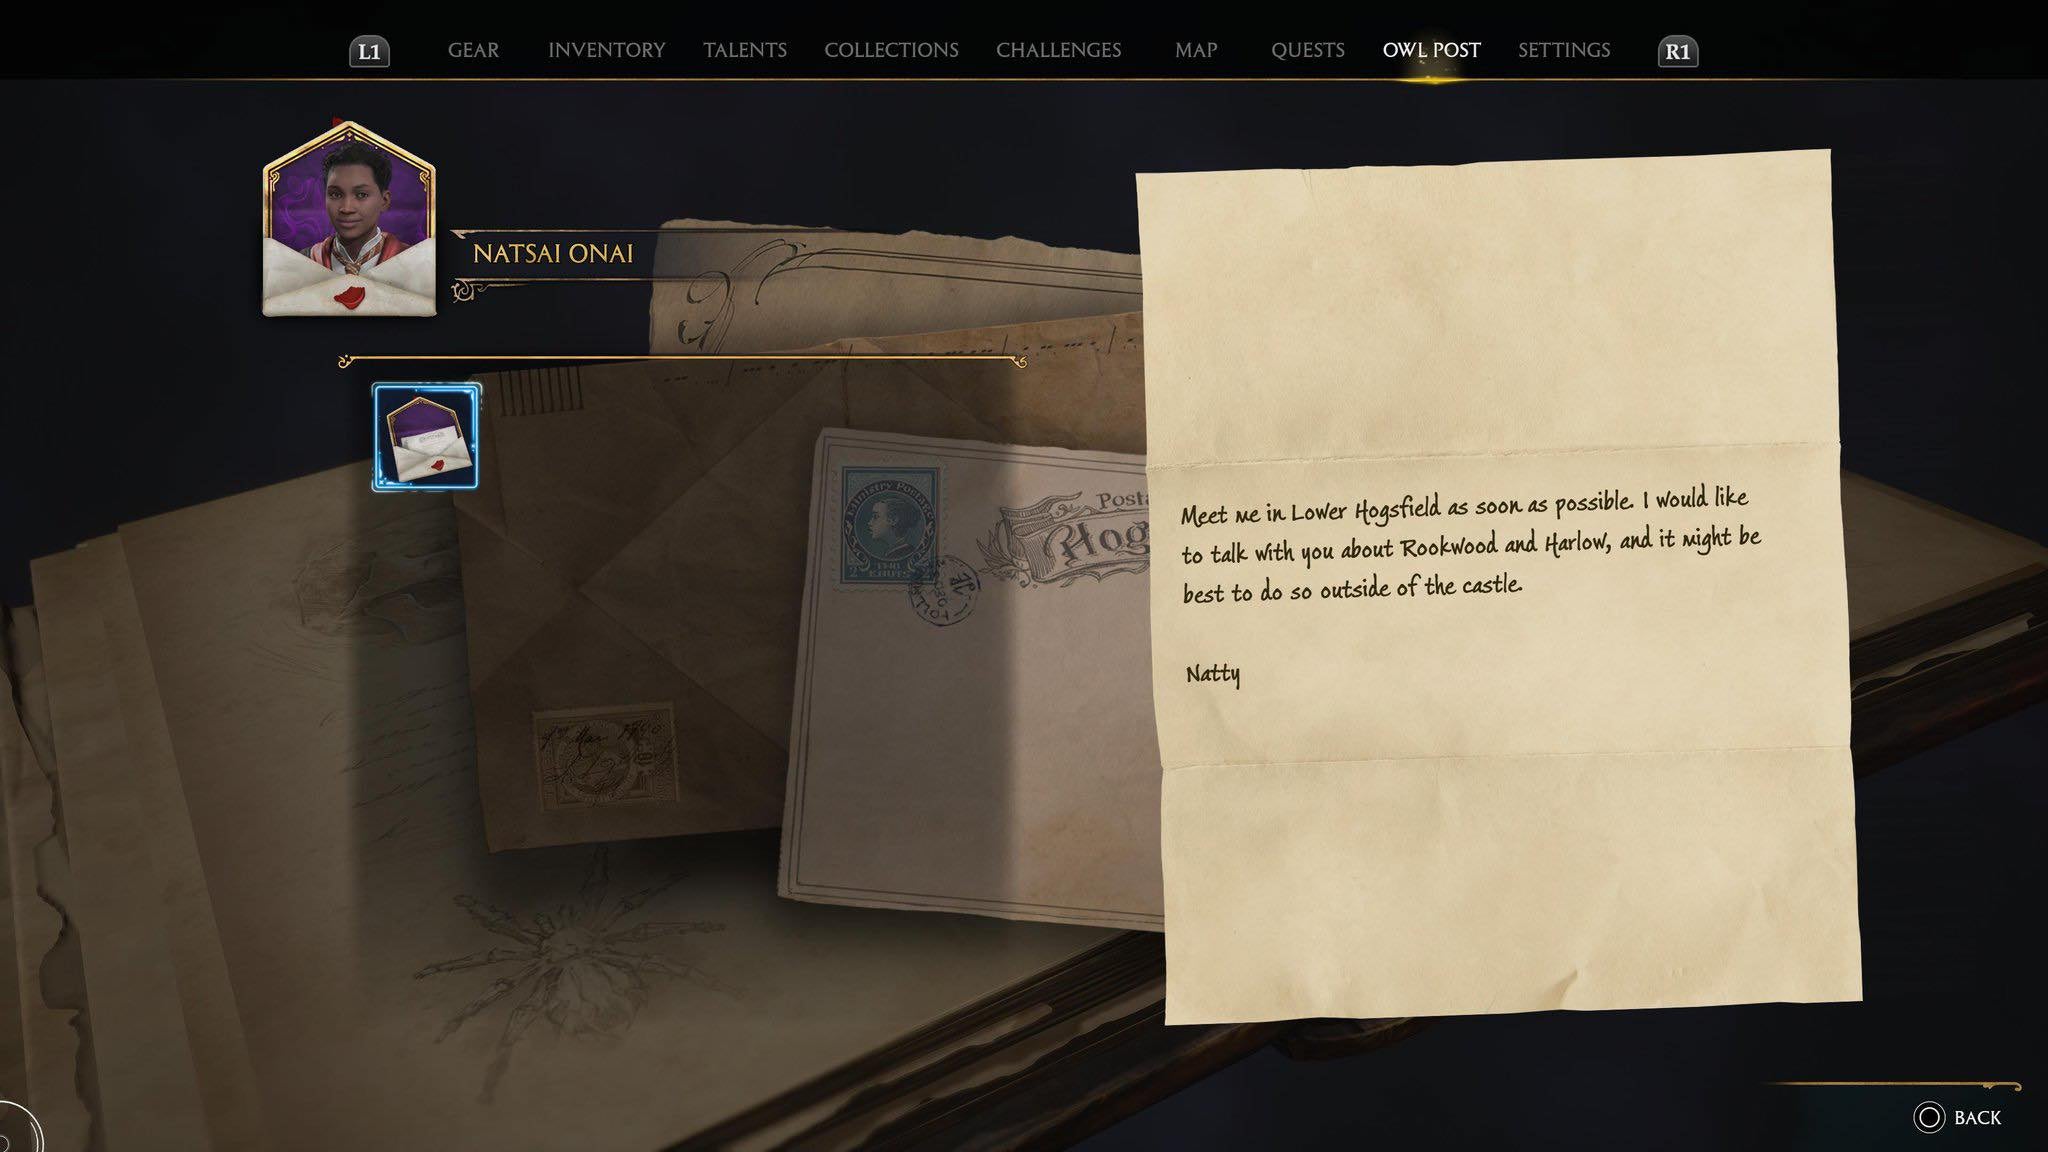 A letter from one of the character's friends at Hogwarts.